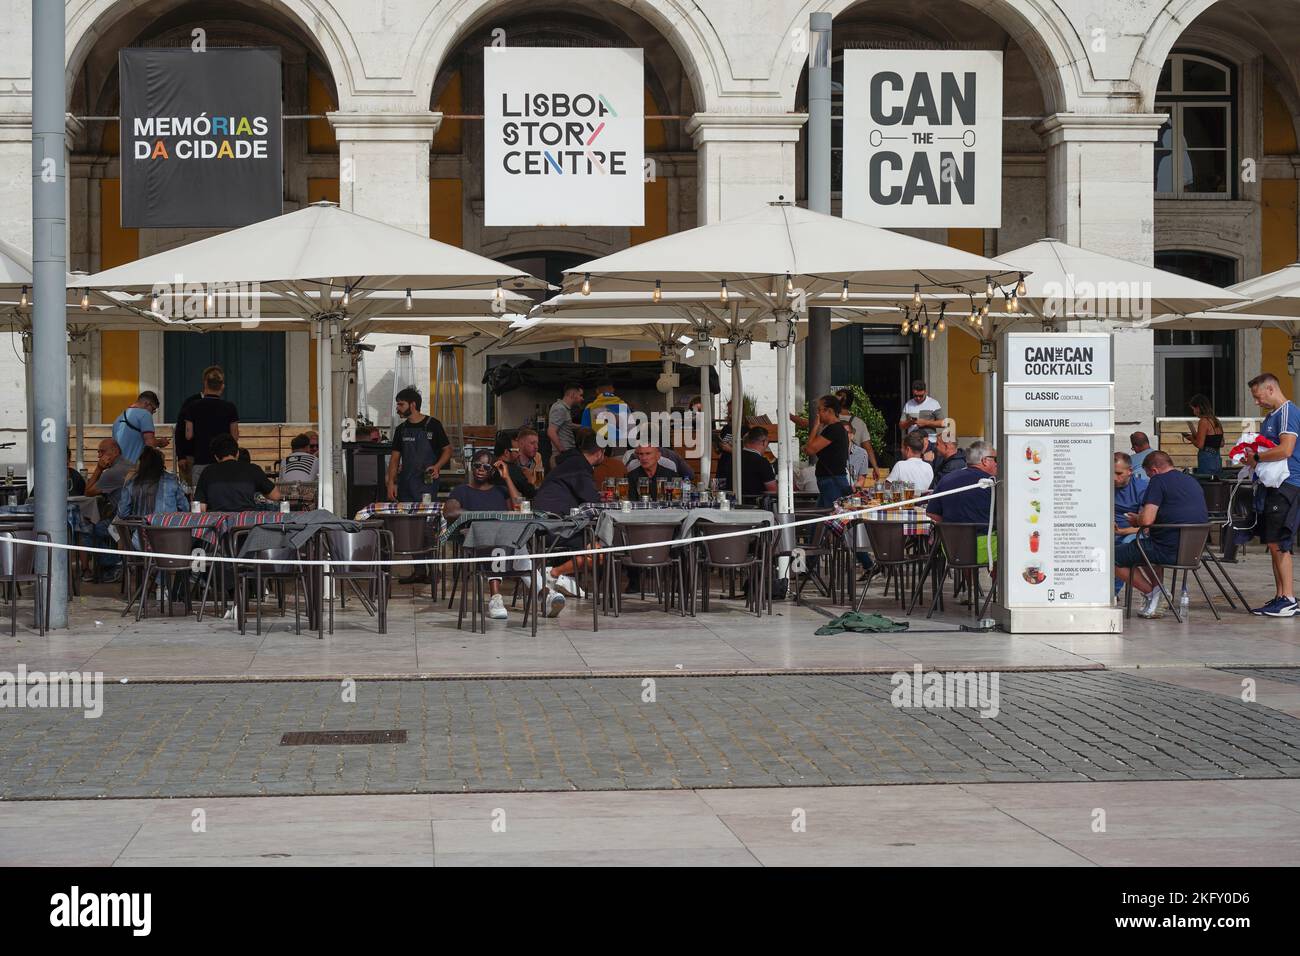 Lisbon, Portugal - September 2022: Tourists drinking at a bar in Lisbon Stock Photo